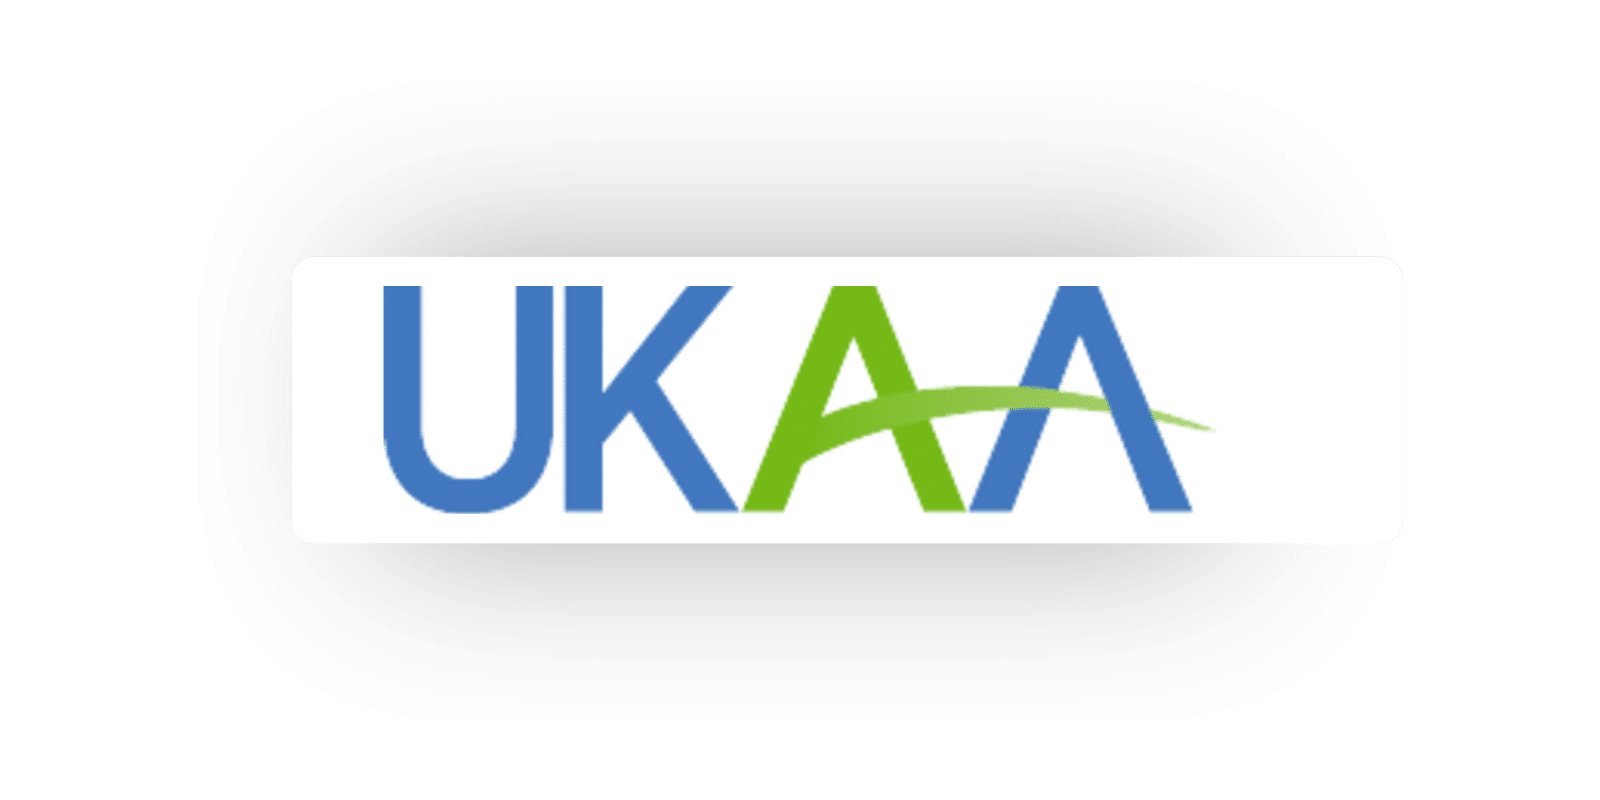 UKAA is the leading association for everyone involved in the UK Build To Rent sector. Grace Hill is a “Key” Partner with the UKAA, and we work together to educate the BTR sector with joint webinars and other educational opportunities to bring to the UKAA membership base. Grace Hill is also a key contributor to the UKAA Best Practices Guide.